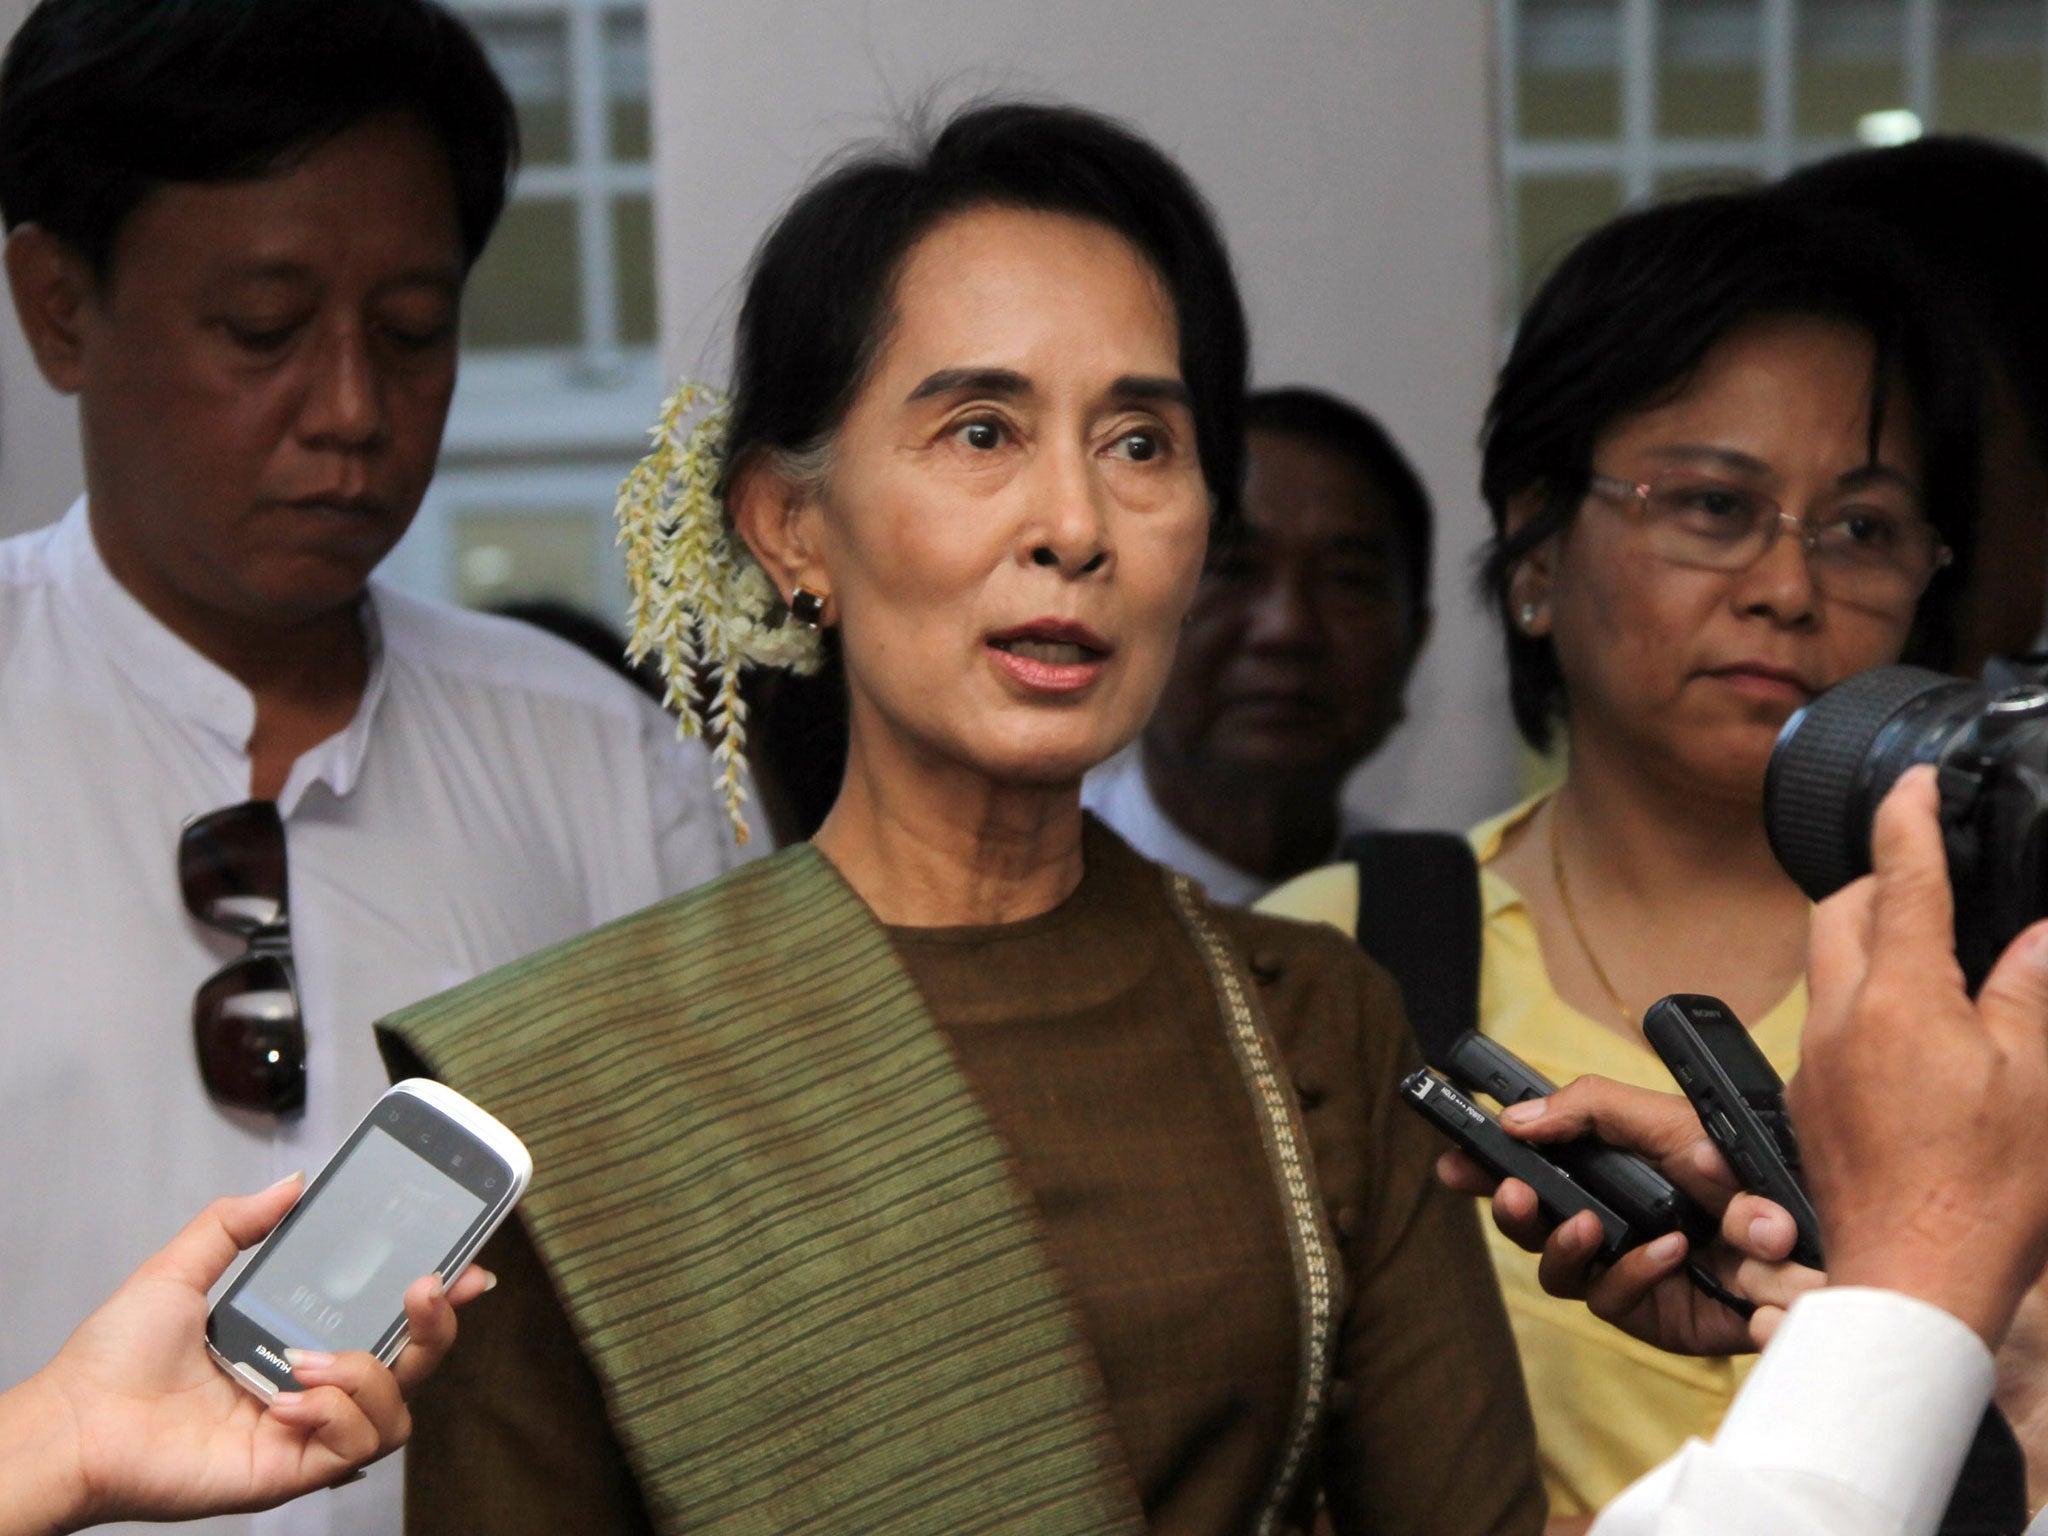 Aung San Suu Kyi is agitating for constitutional change